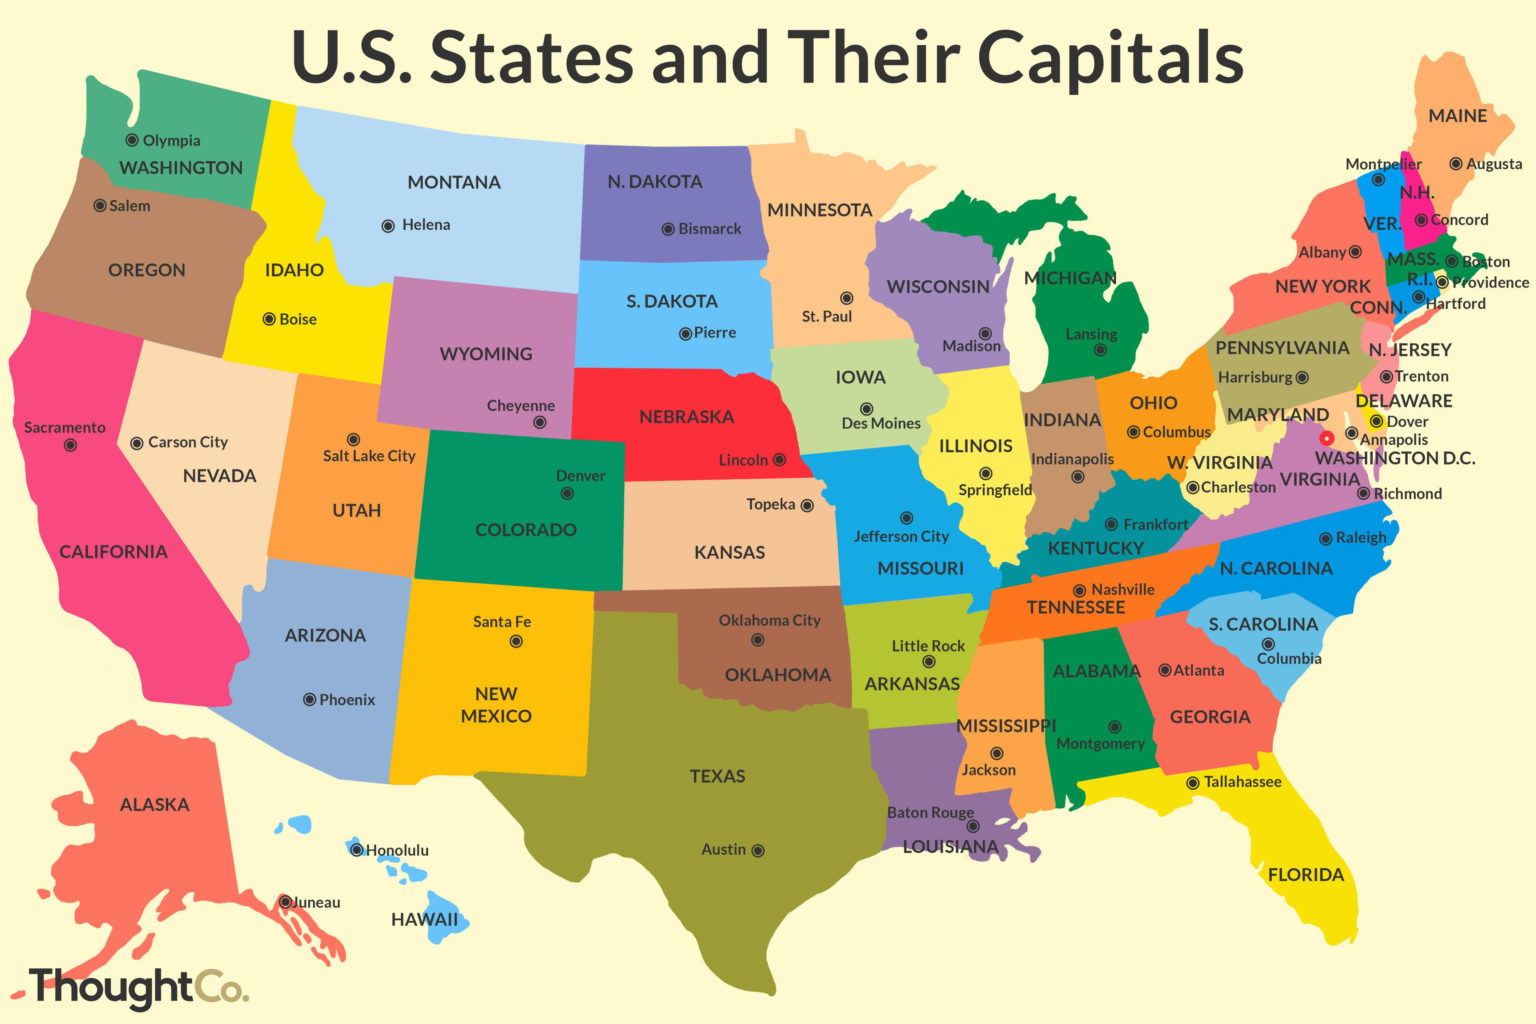 map of the united states with capitols printable map - us states and